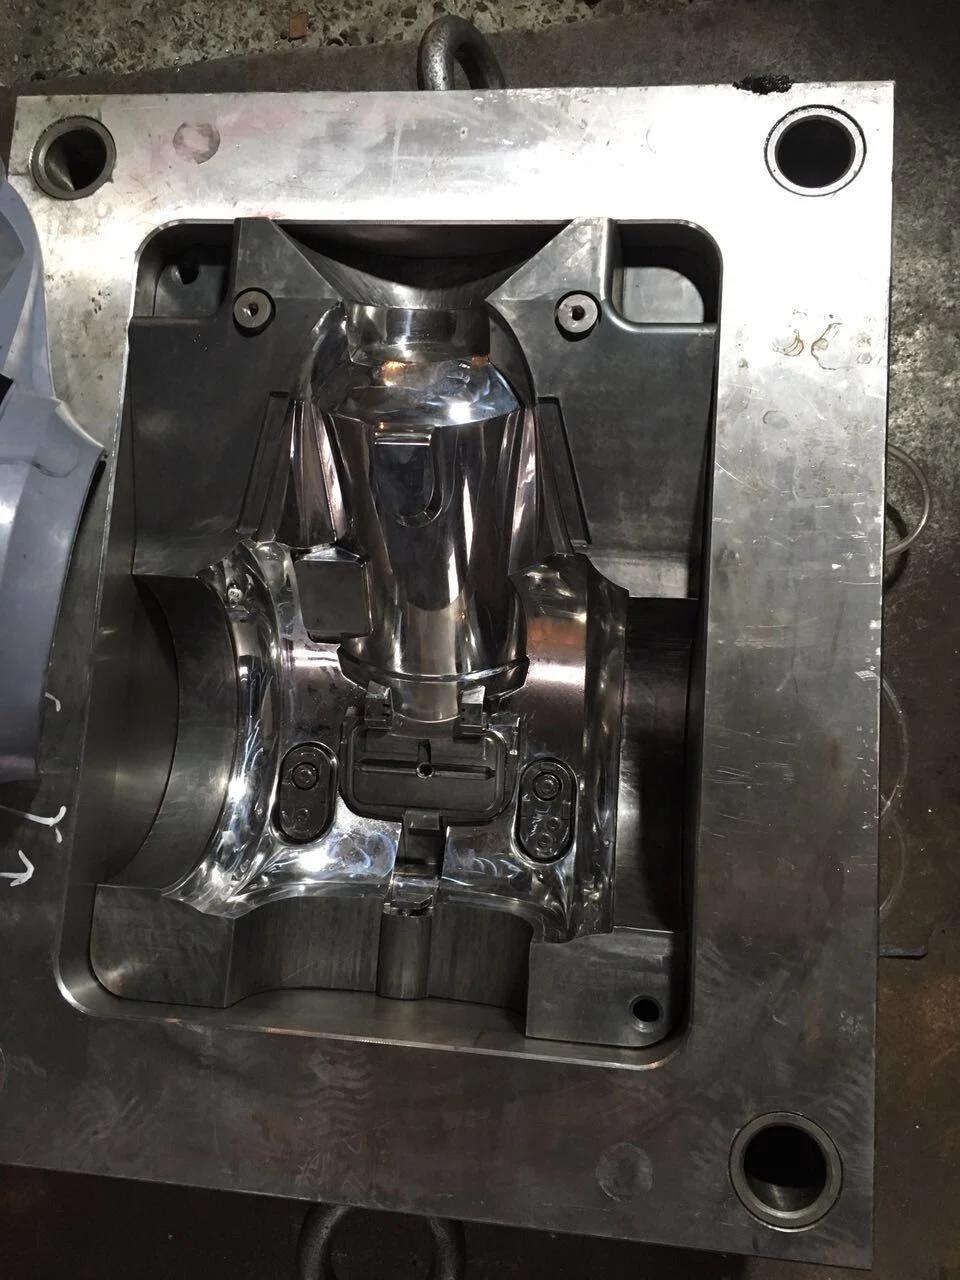 Injeciton Mould for Car Vacuum Cleaner